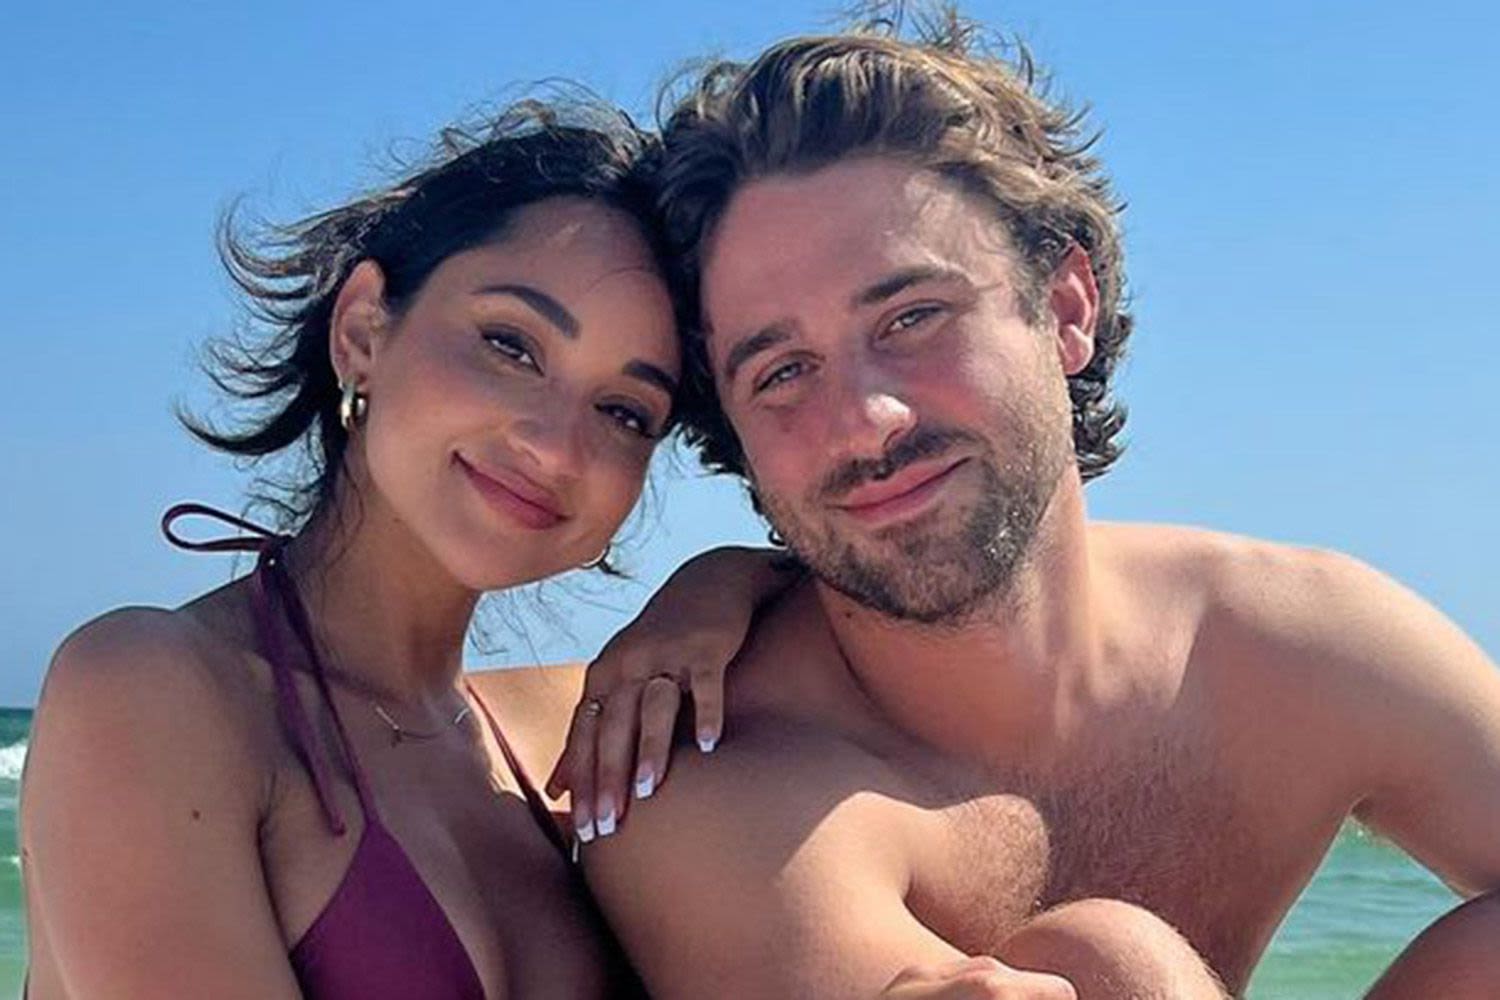 “Bachelor in Paradise”'s Victoria Fuller Wishes Greg Grippo 'Nothing But the Best' as She Speaks Out About Their Breakup